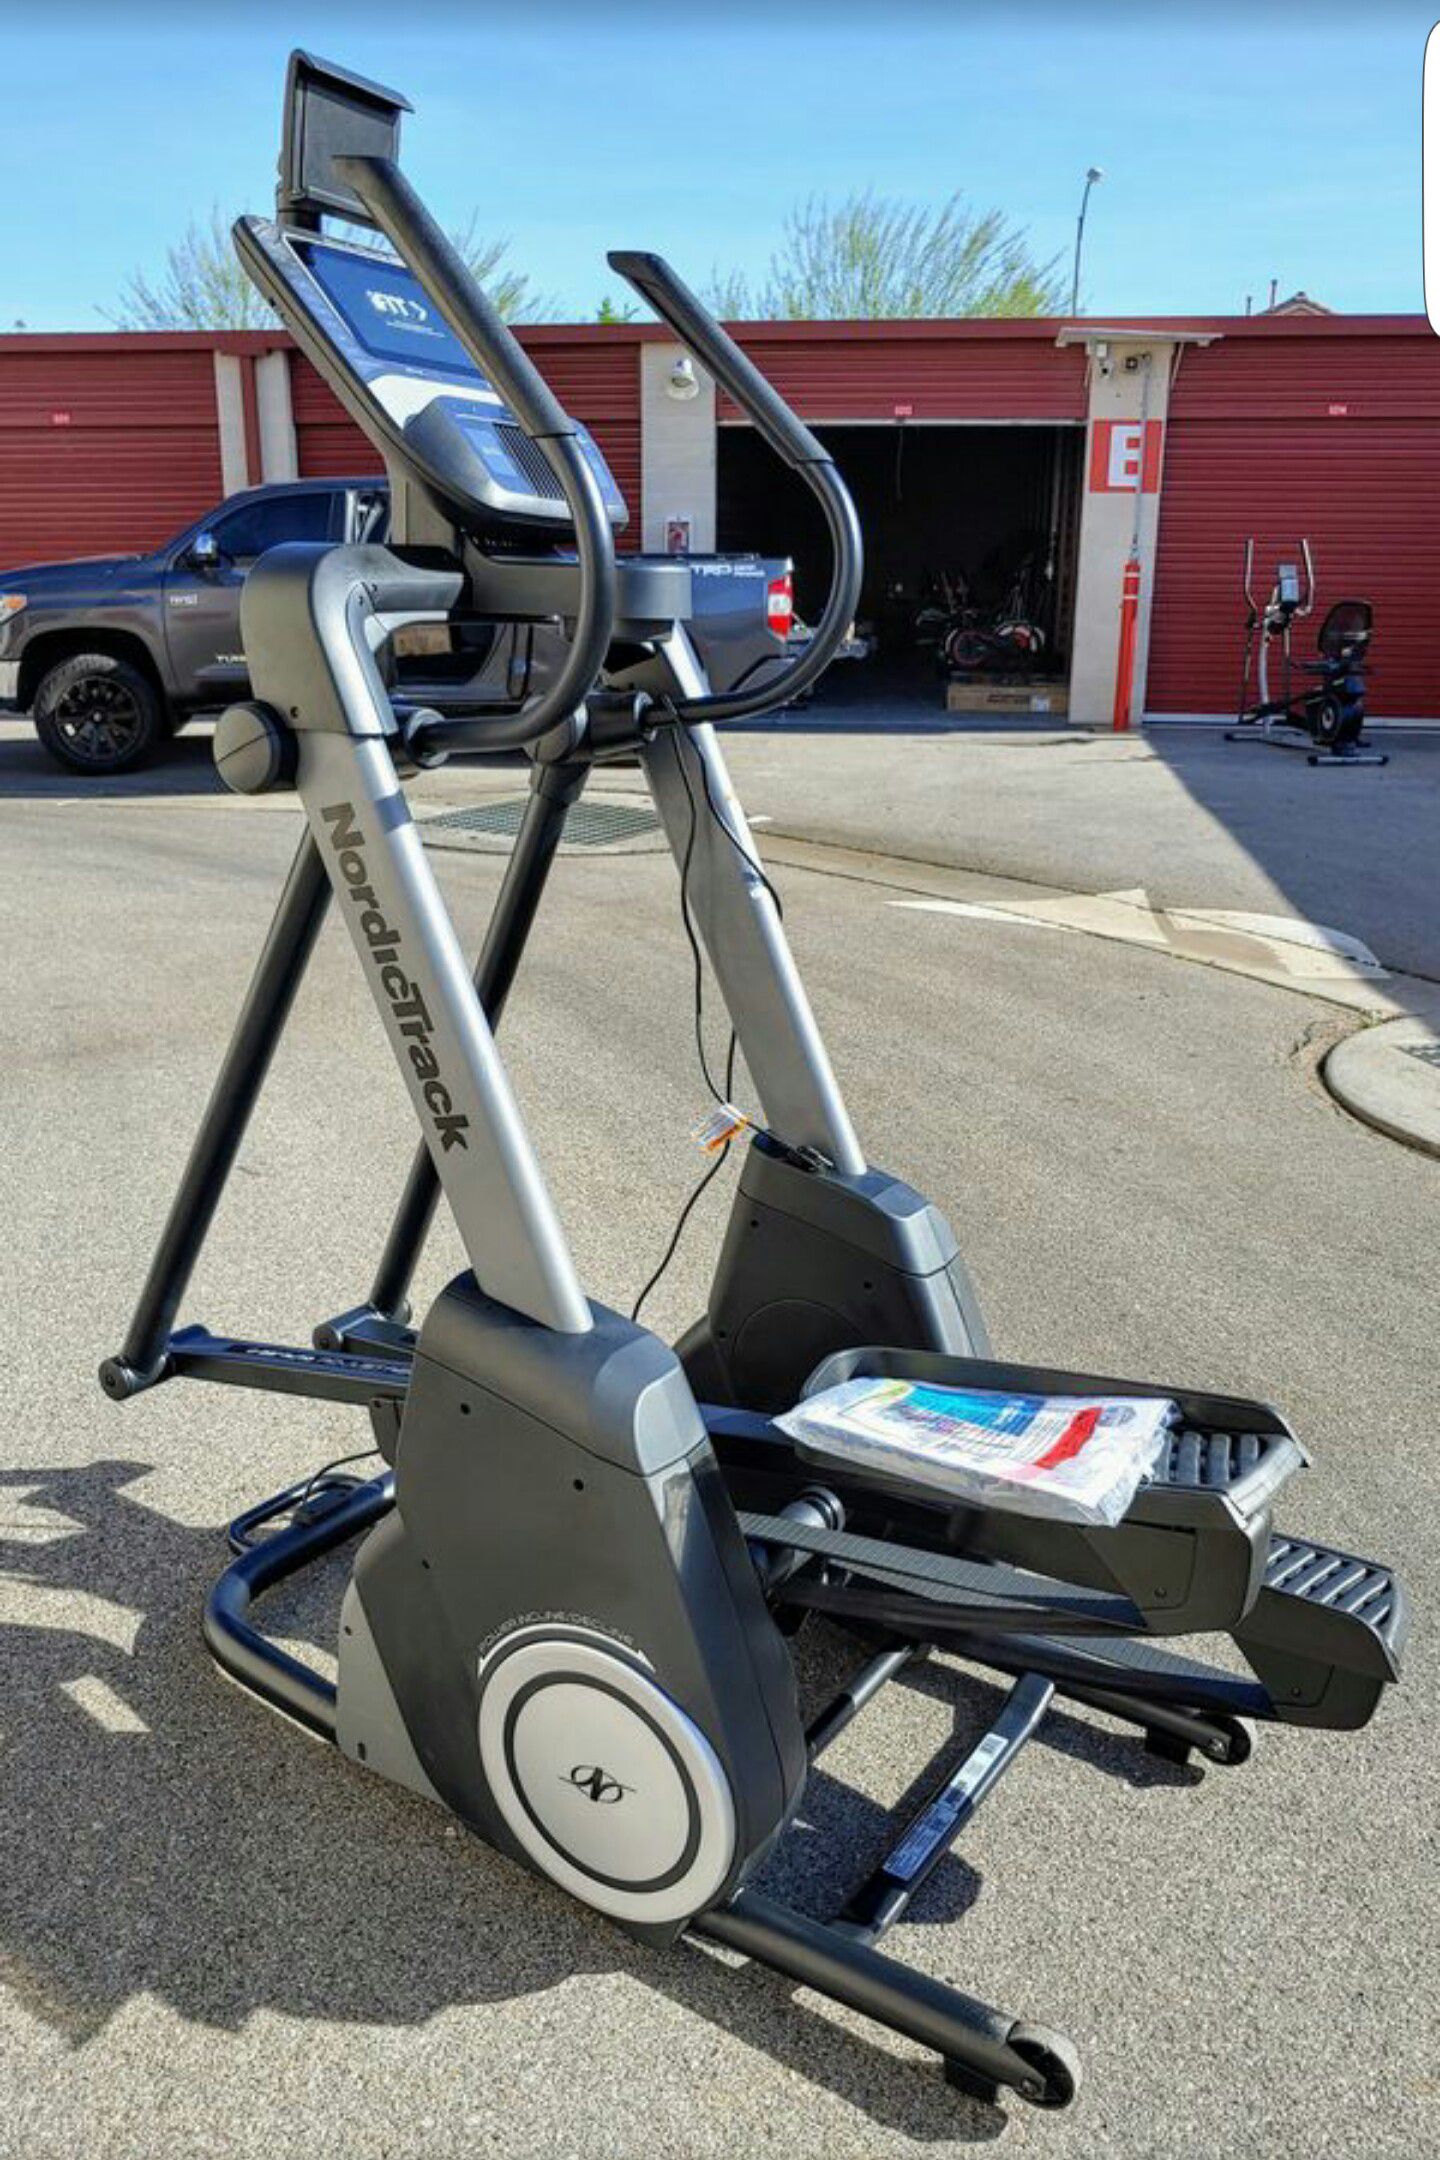 LIQUIDATION 💥 (RETAIL: $4,000 🚫) NordicTrack Elliptical FS9 Smart 🚫 RETAIL $4000 ✅ WARRANTY. 💸 $200 DISCOUNT 🌟 if you pick it up Yourself